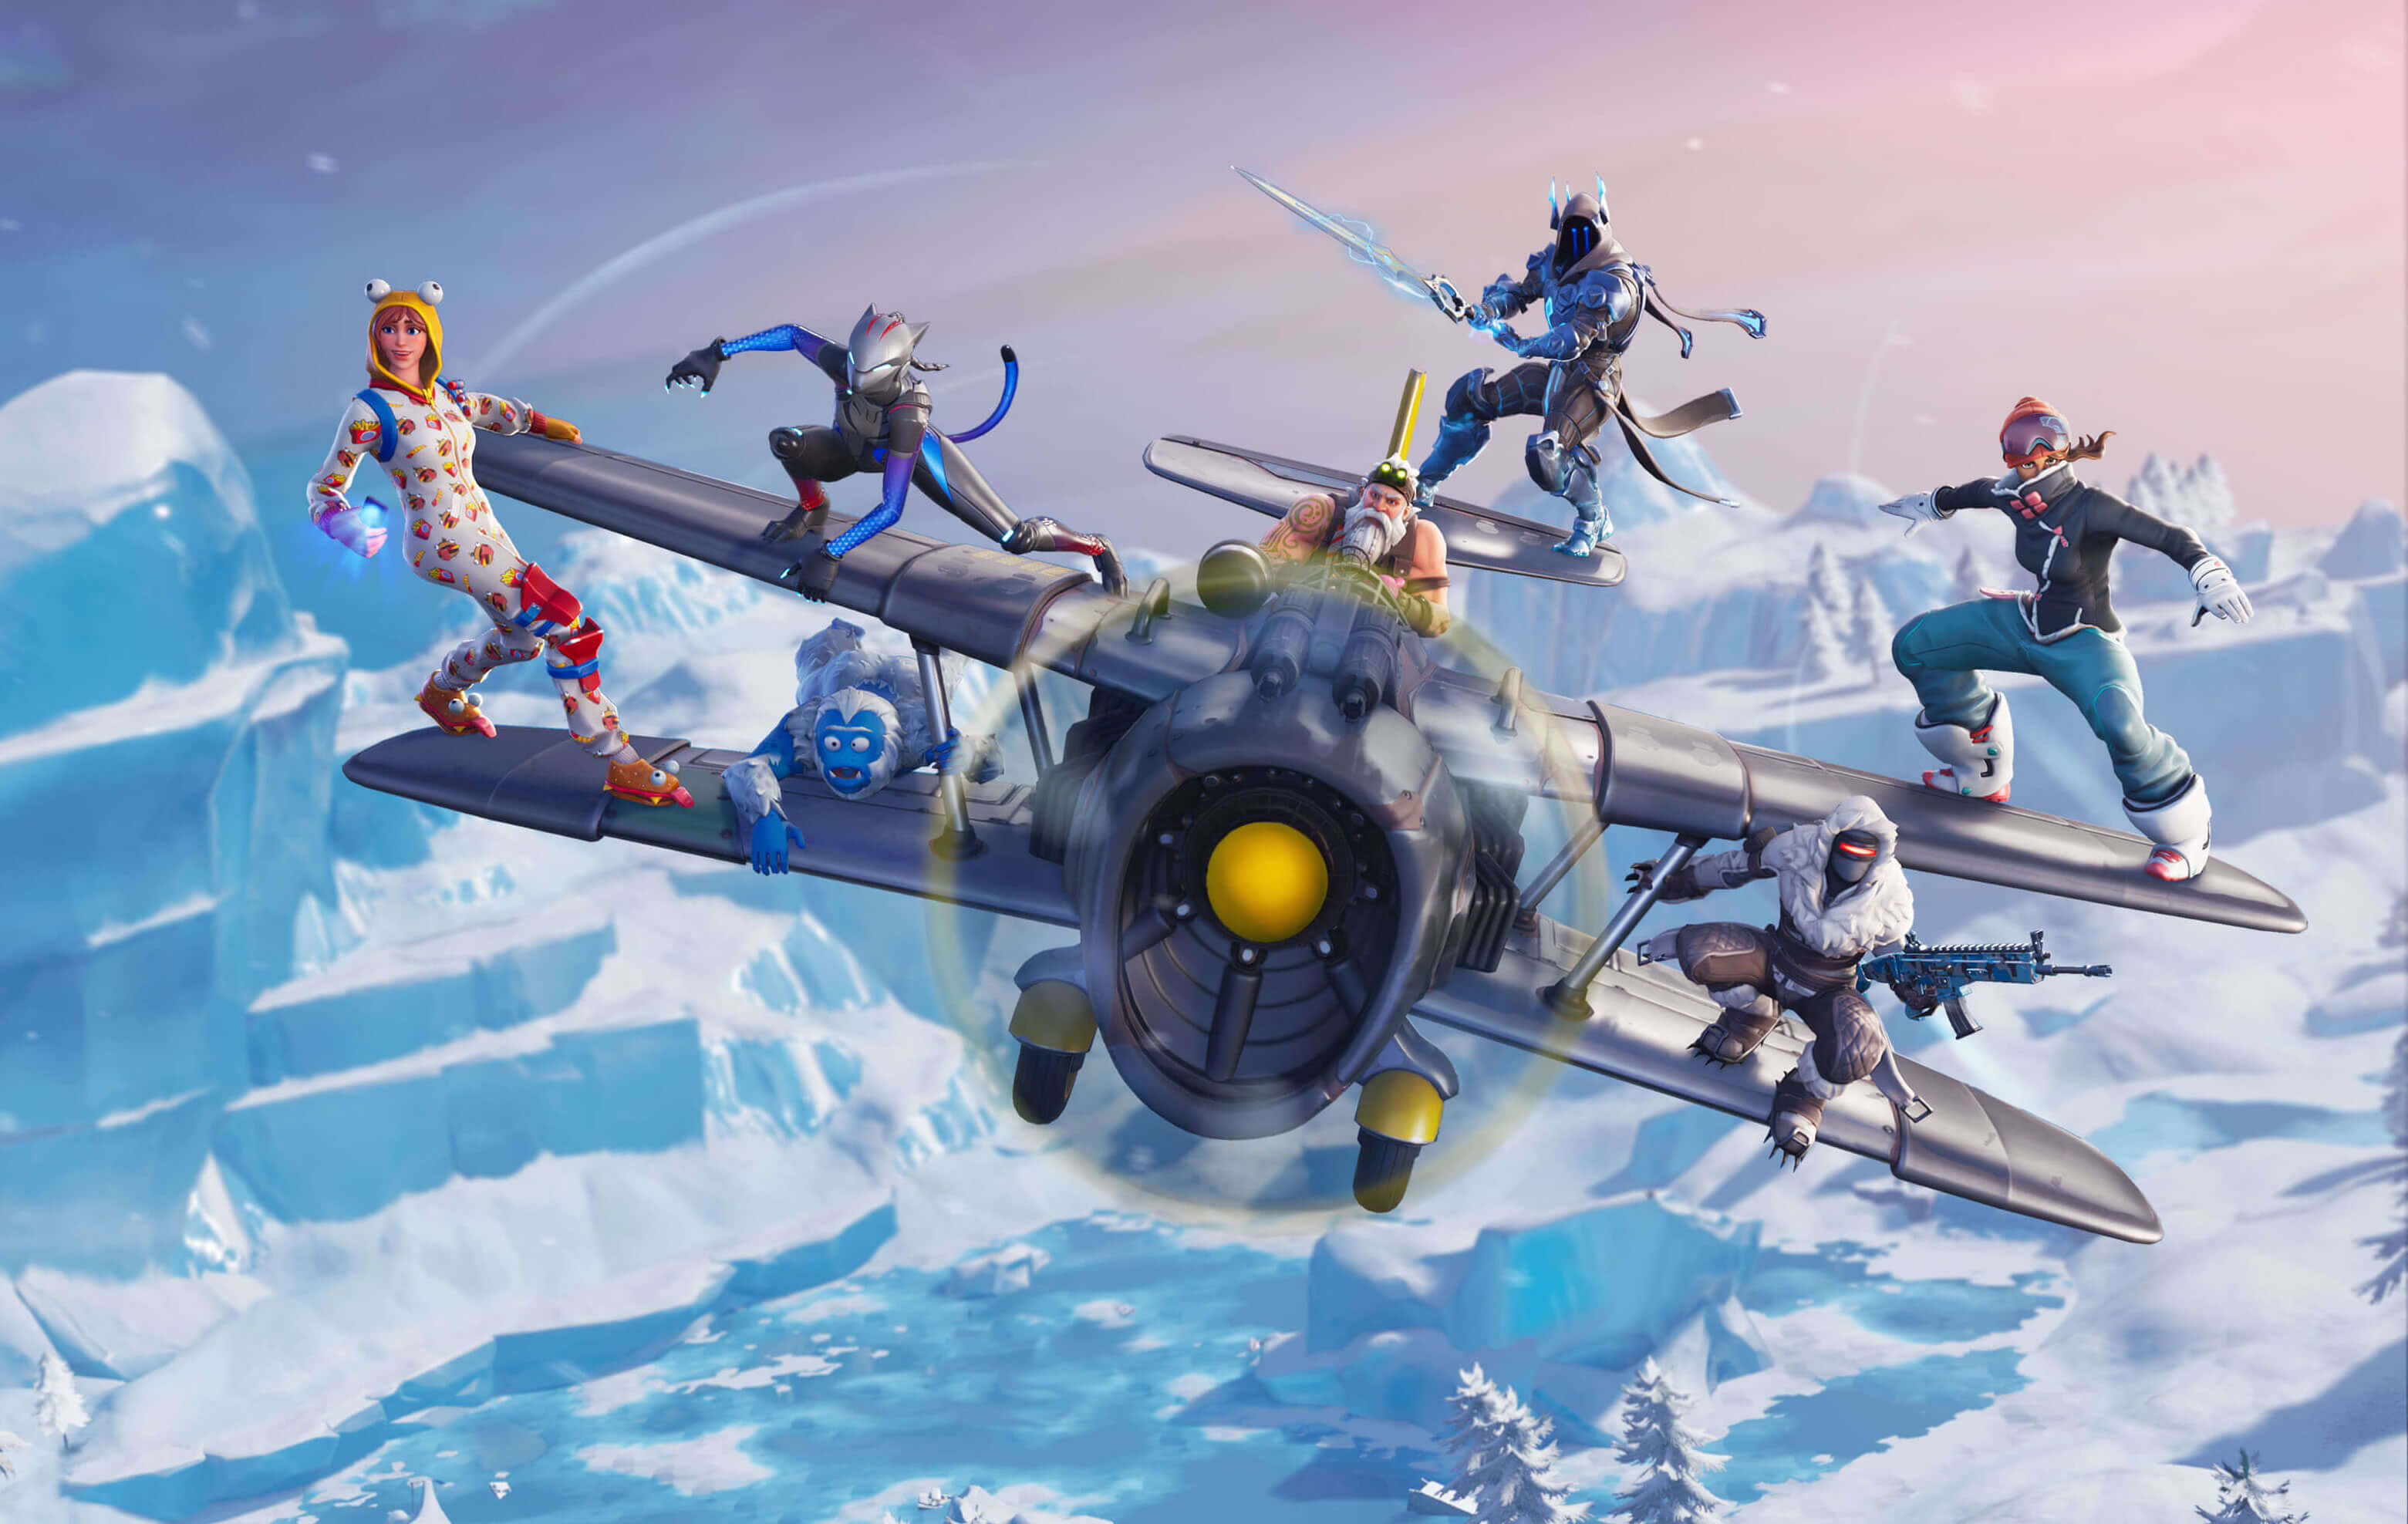 Epic opens up robust Fortnite cross-play tools to developers for free